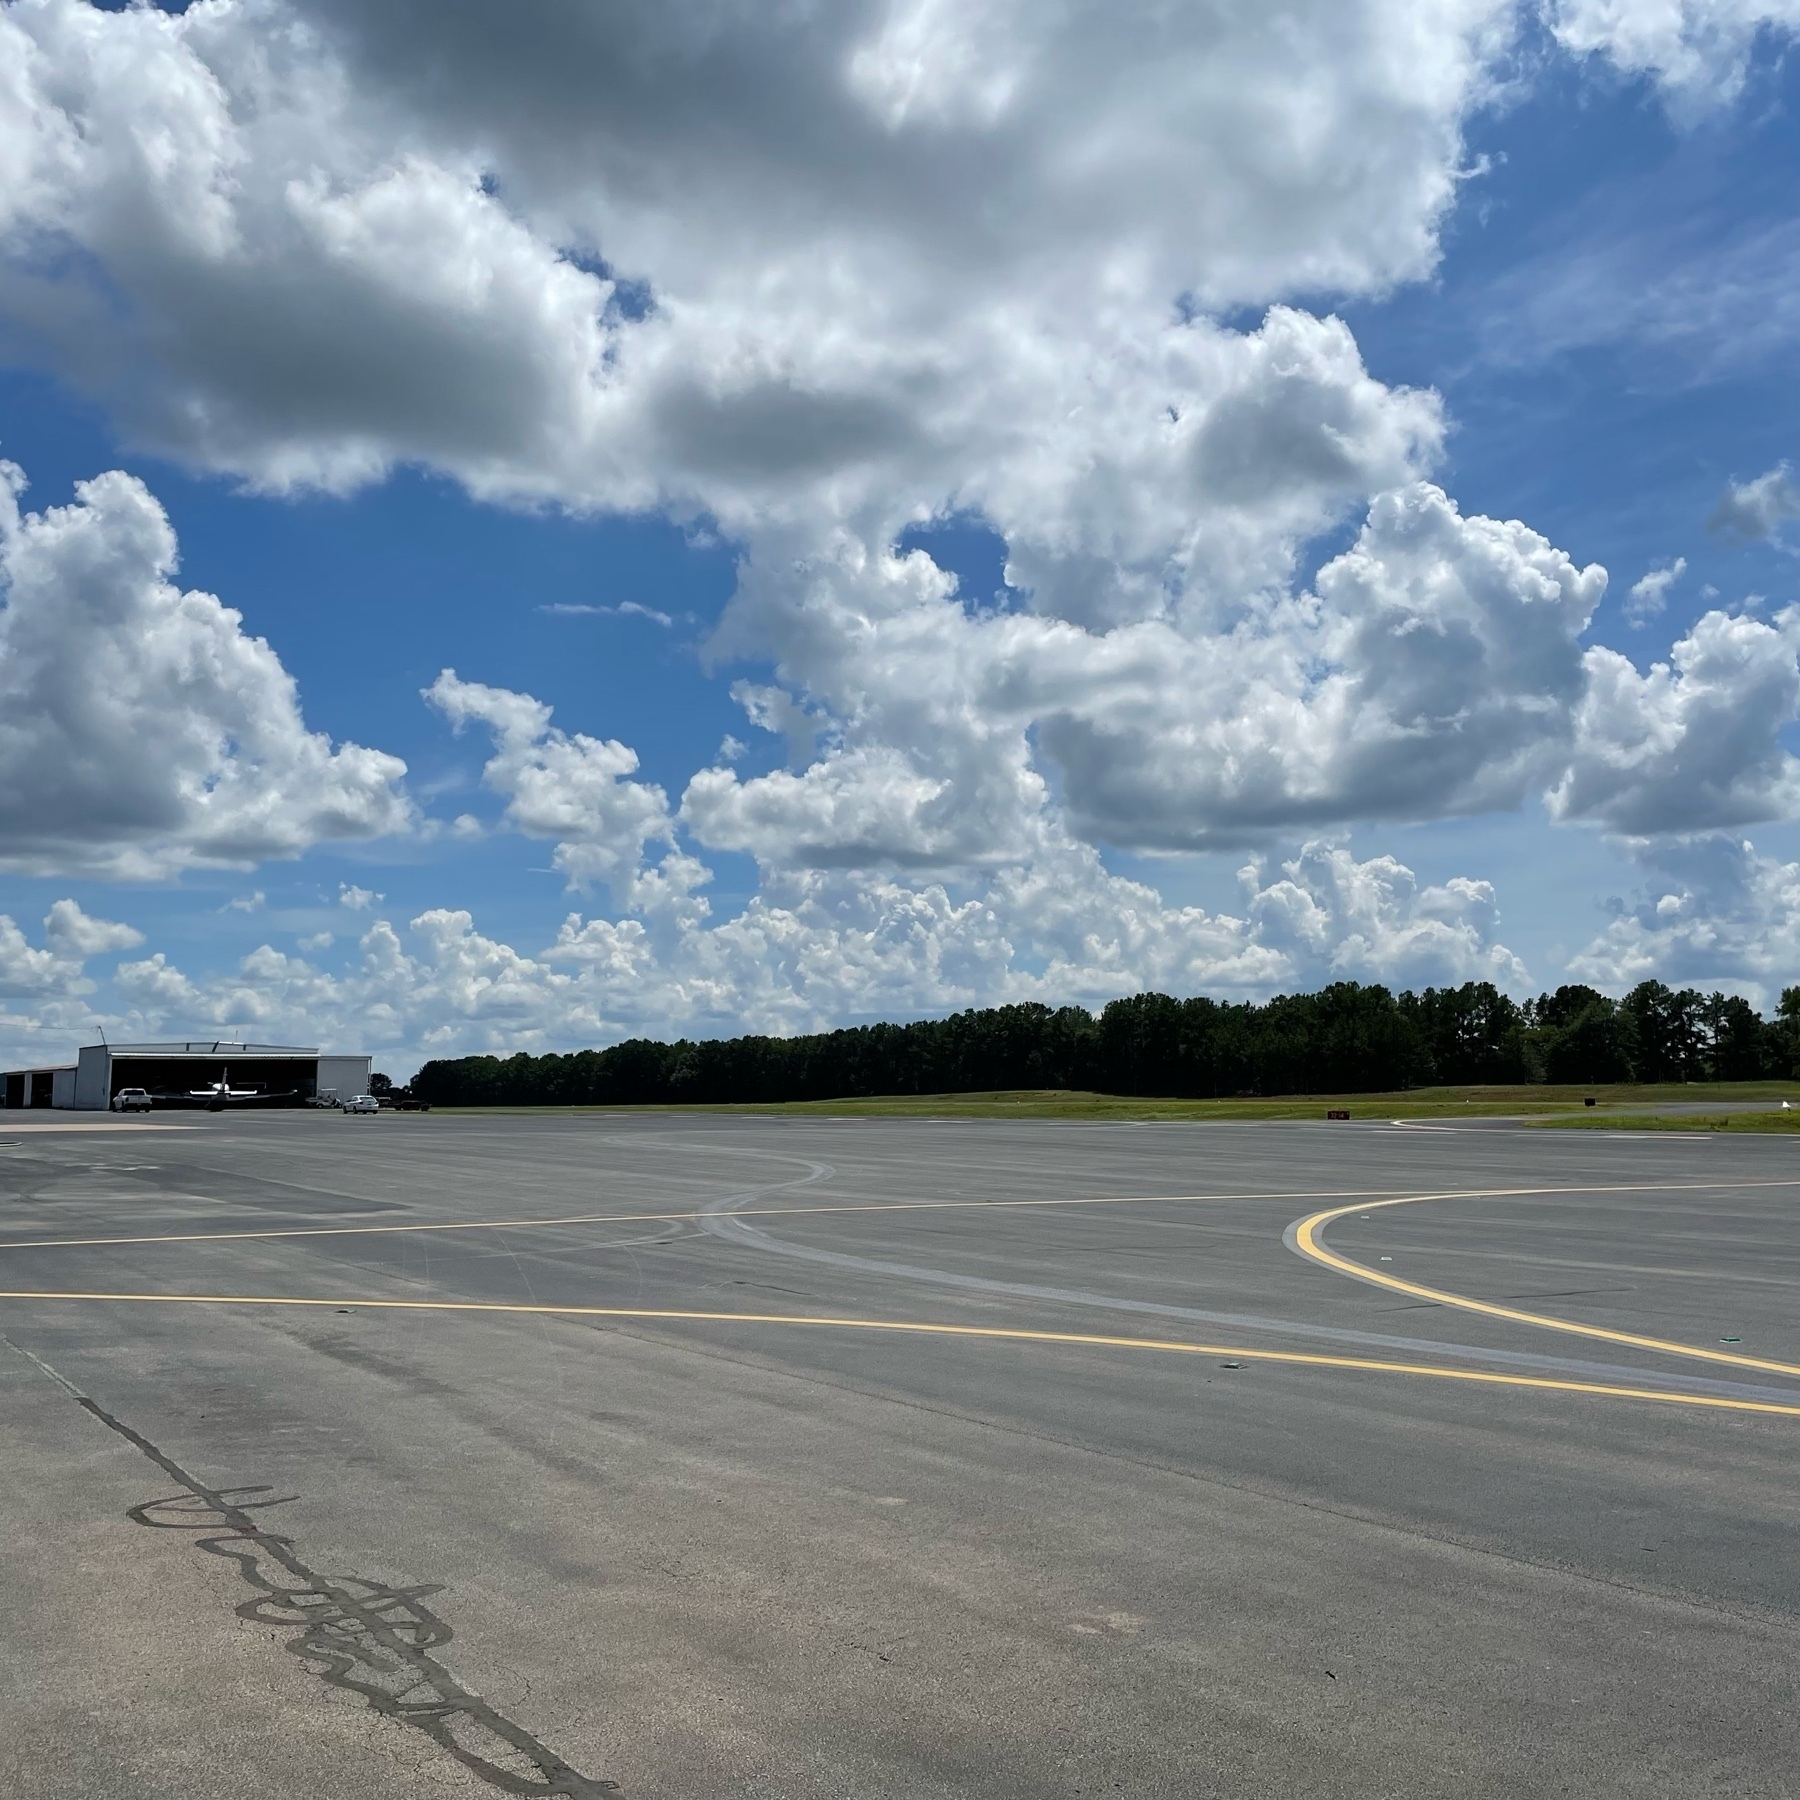 Clouds and sunny sky over an airport ramp